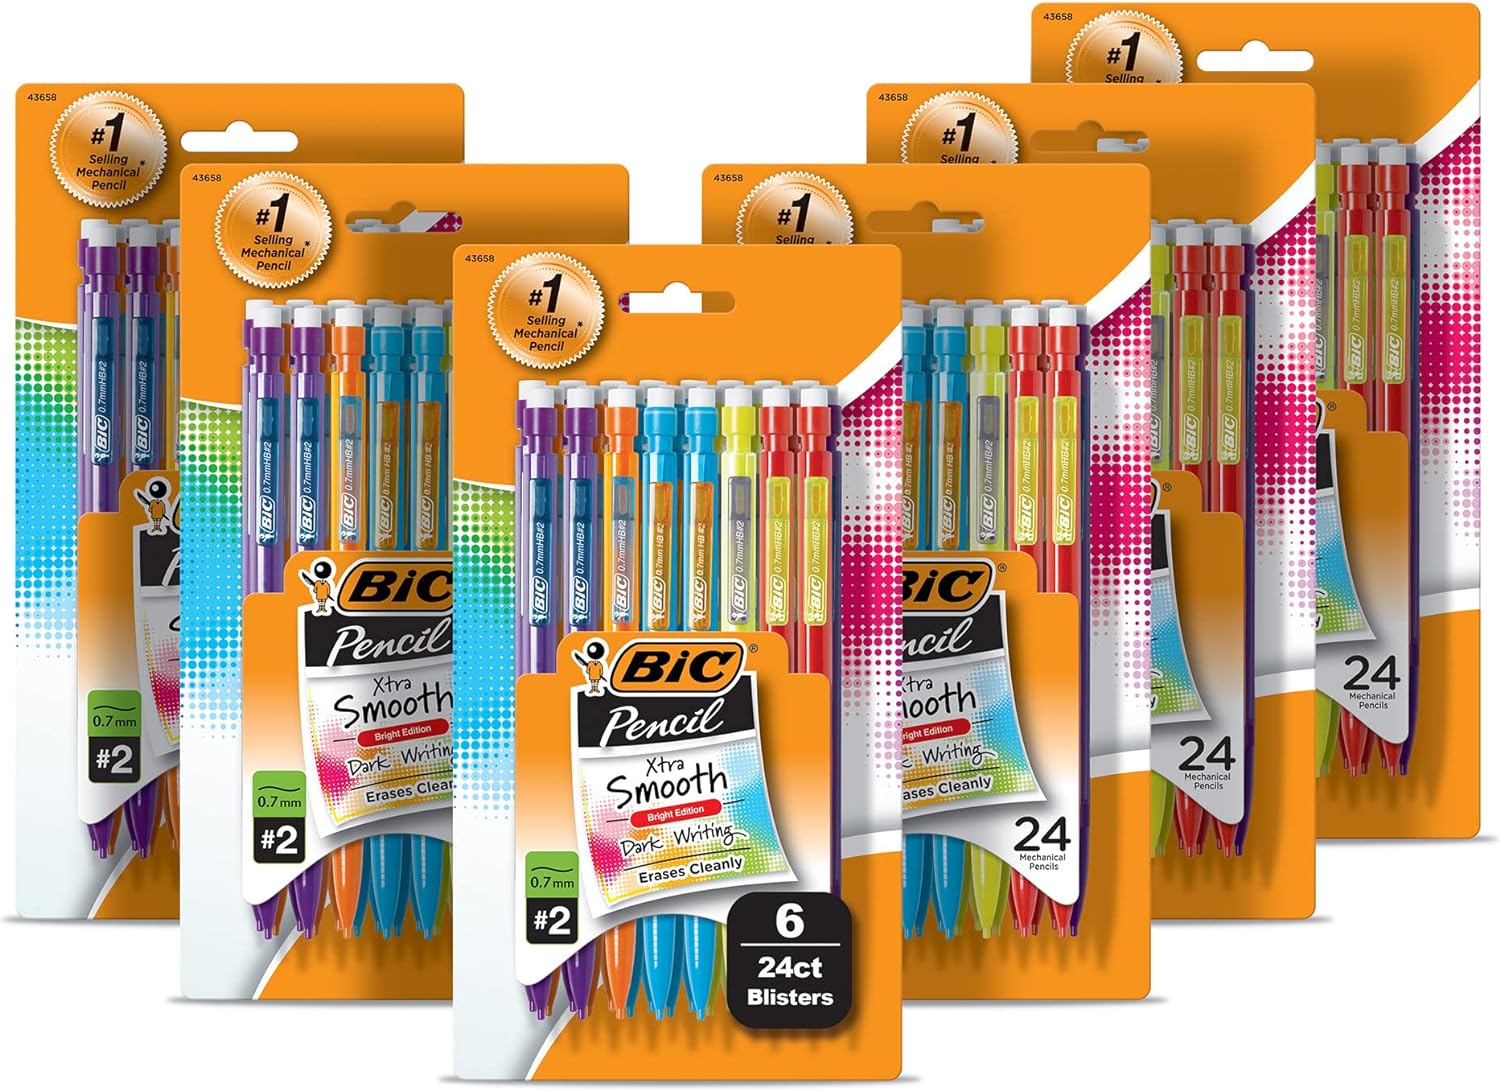 I hate regular pencils. These are a great cost effective alternative. I buy these for my kids age 6 - 14. We buy a few boxes a couple times a year. Definitely worth the price.